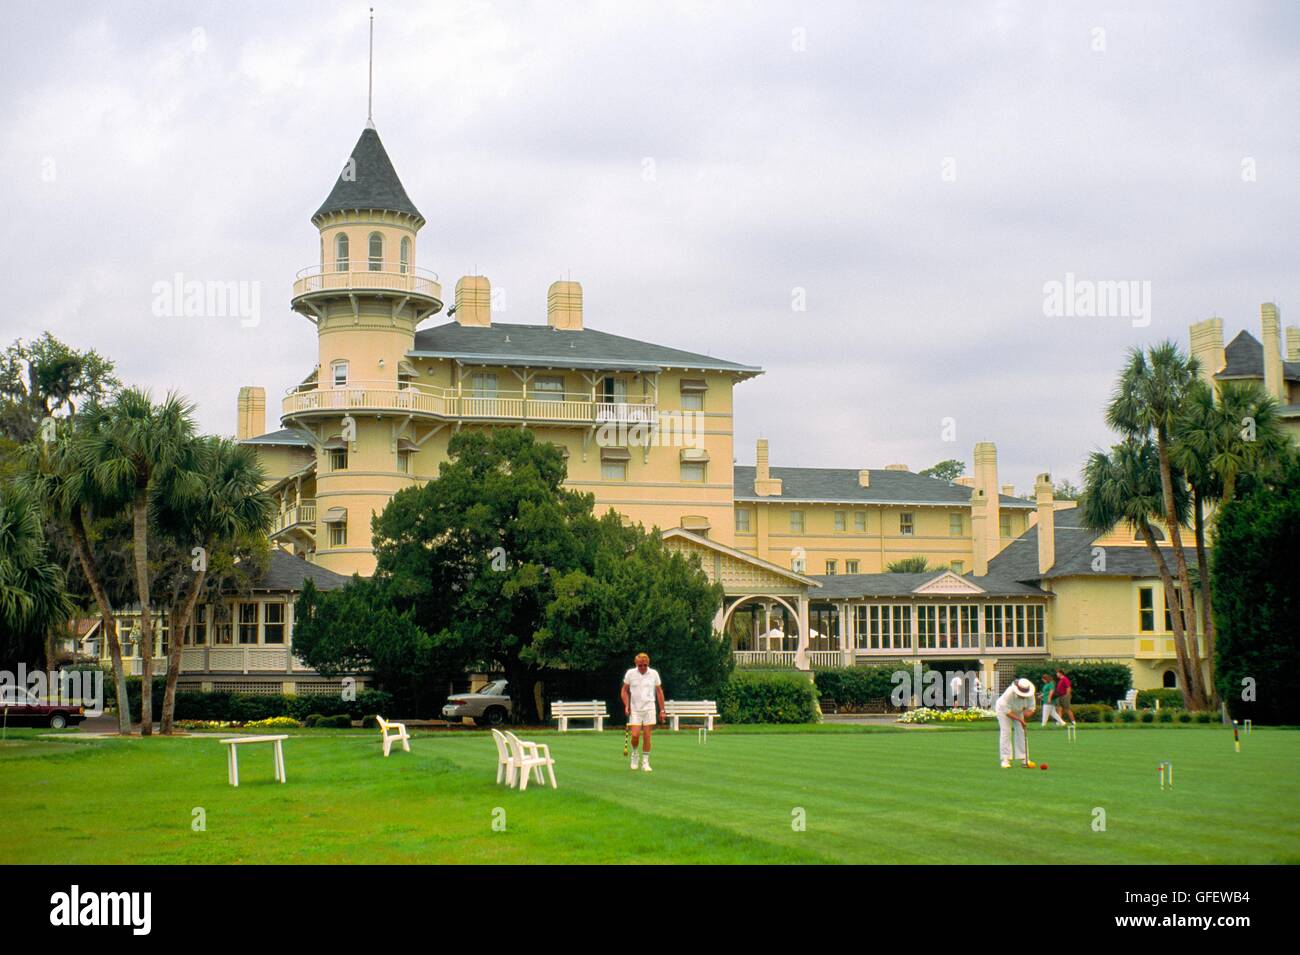 The Jekyll Island Resort Club Hotel, Florida, USA dates from 1887. Guests playing croquet on the lawn Stock Photo